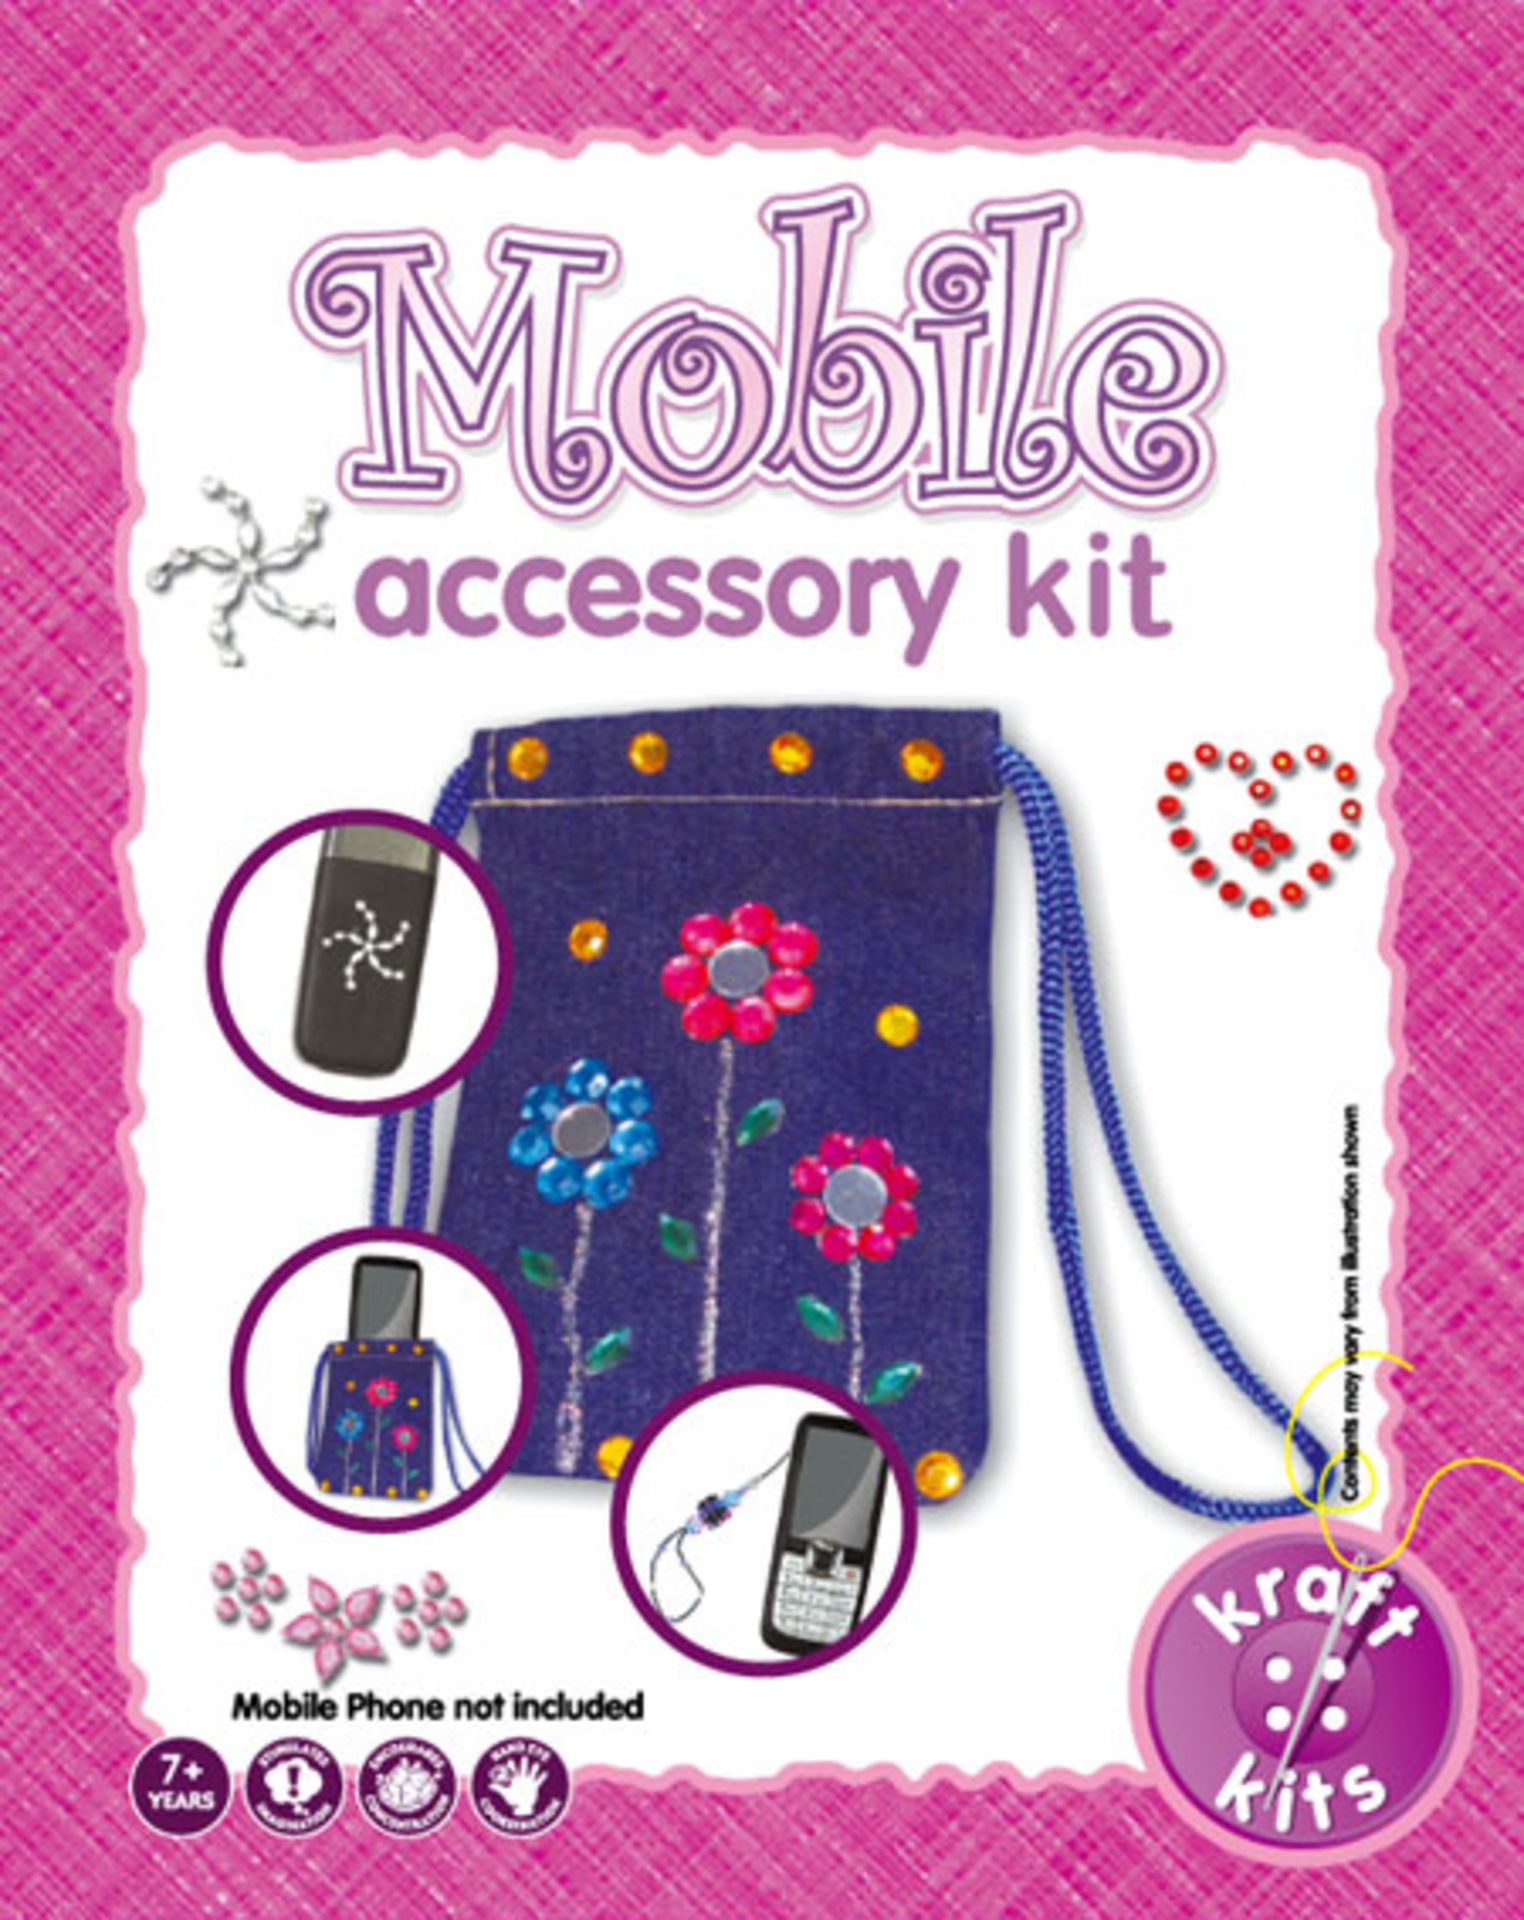 x2 New Mobile Phone Accessory Kit